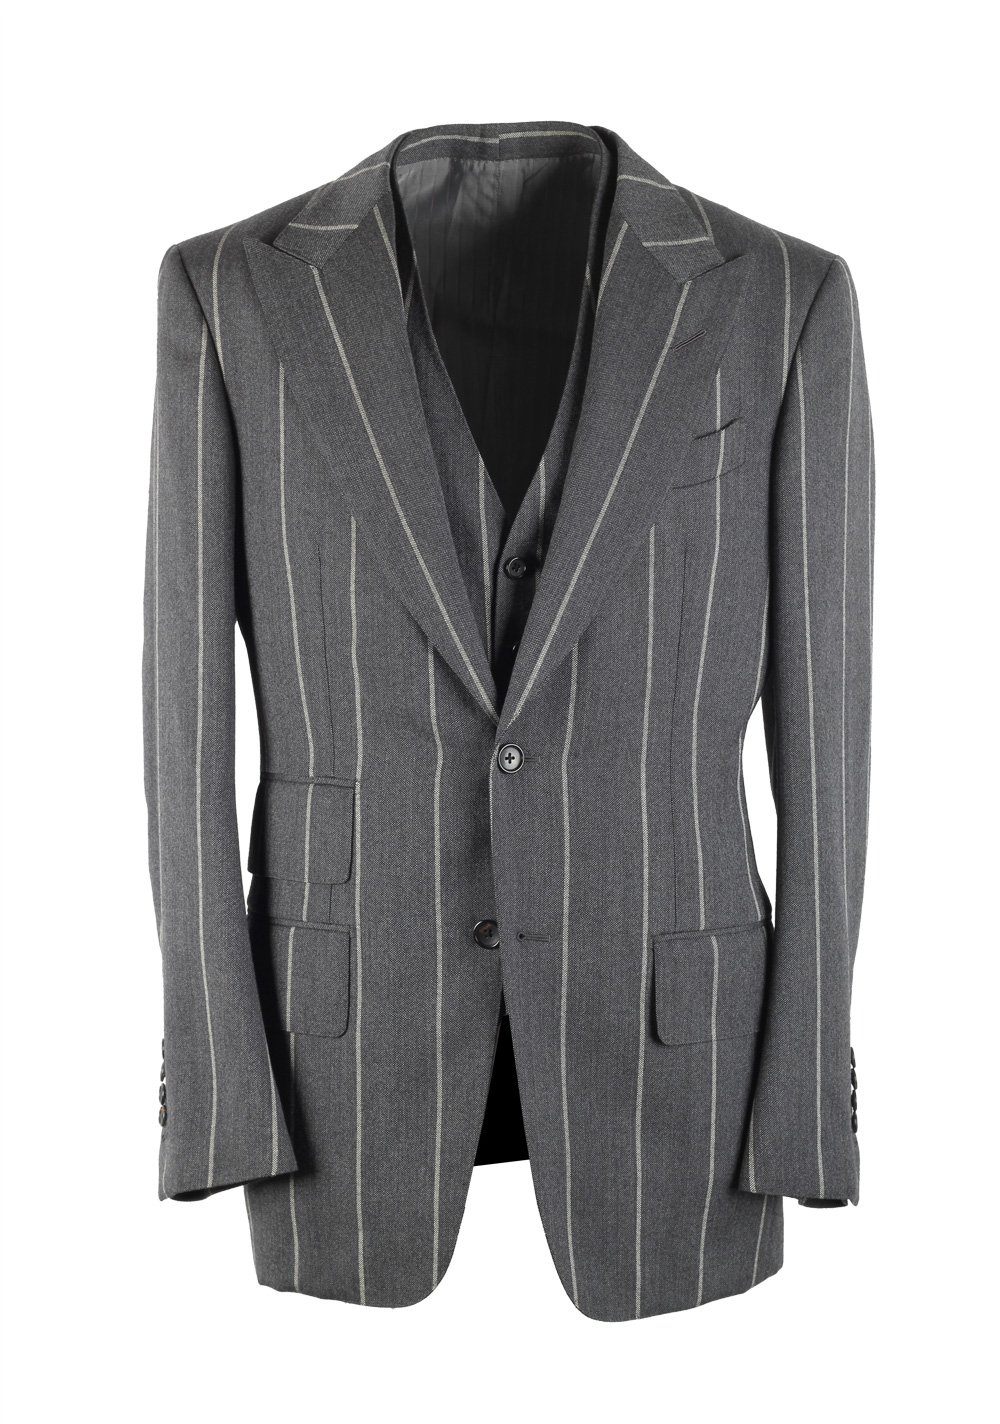 TOM FORD Spencer Striped Gray 3 Piece Suit Size 48 / 38R U.S. Wool Fit ...